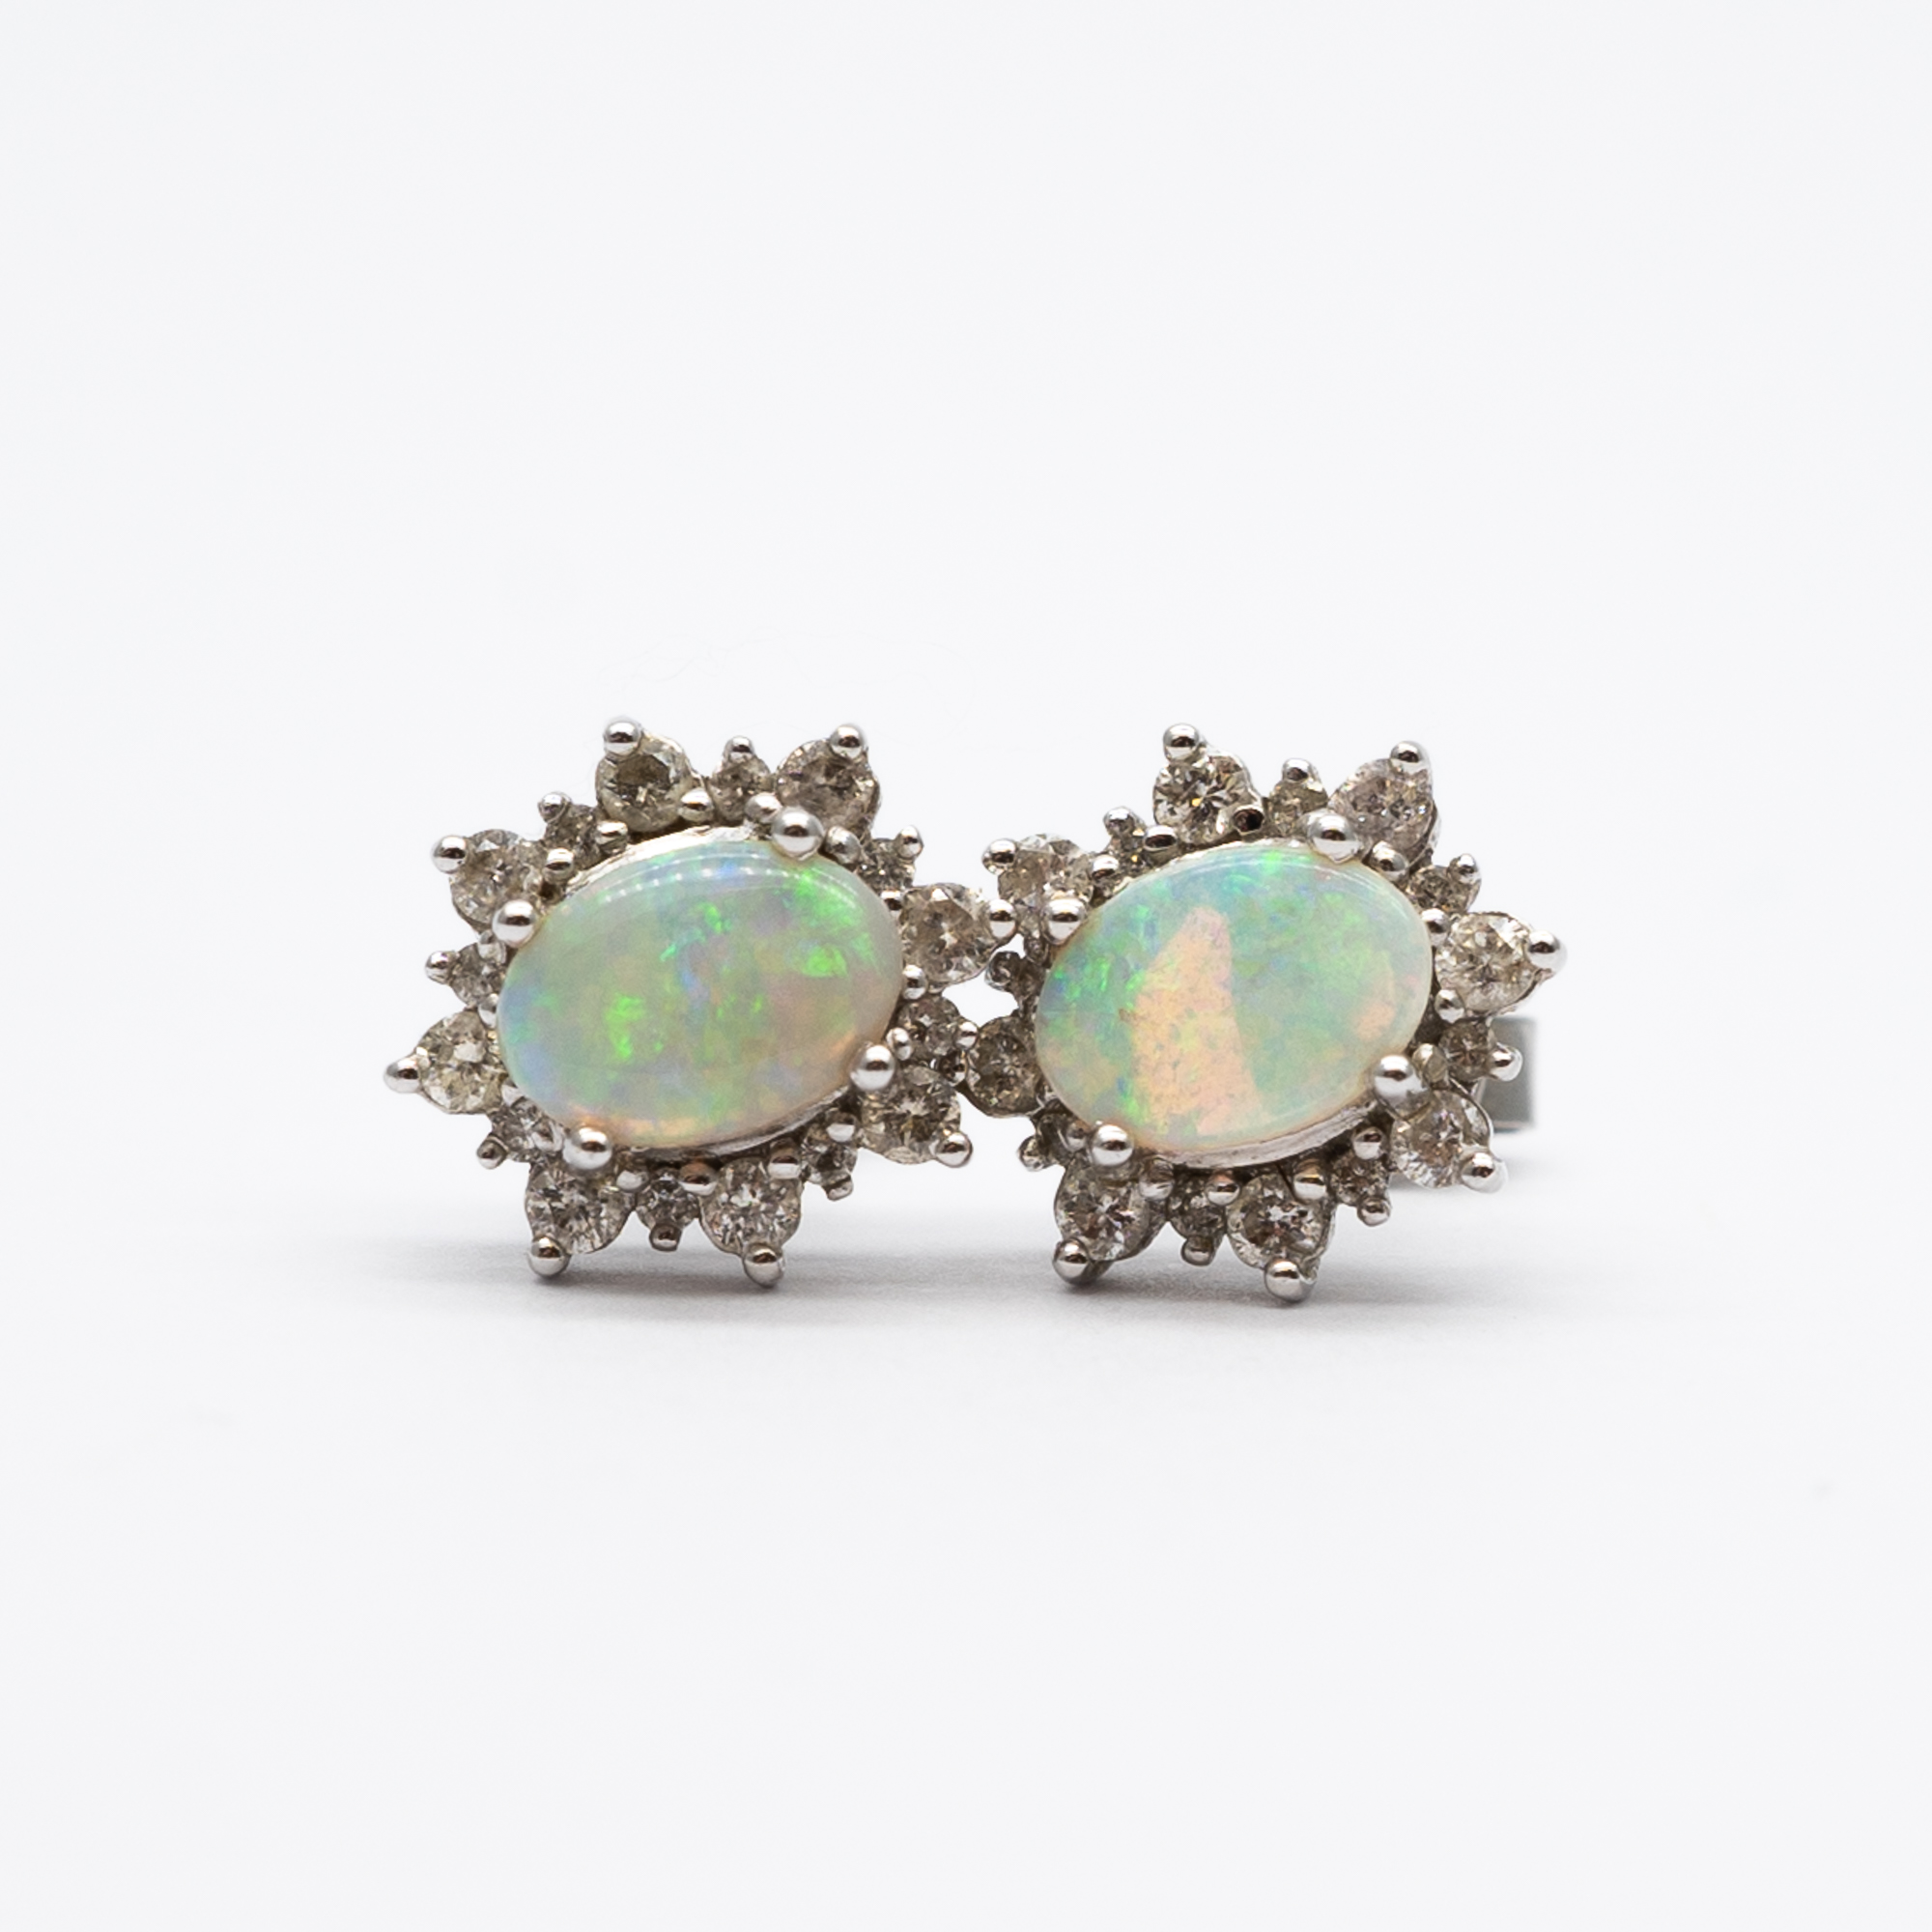 A pair of 18ct white gold opal and diamond earrings - Image 2 of 6